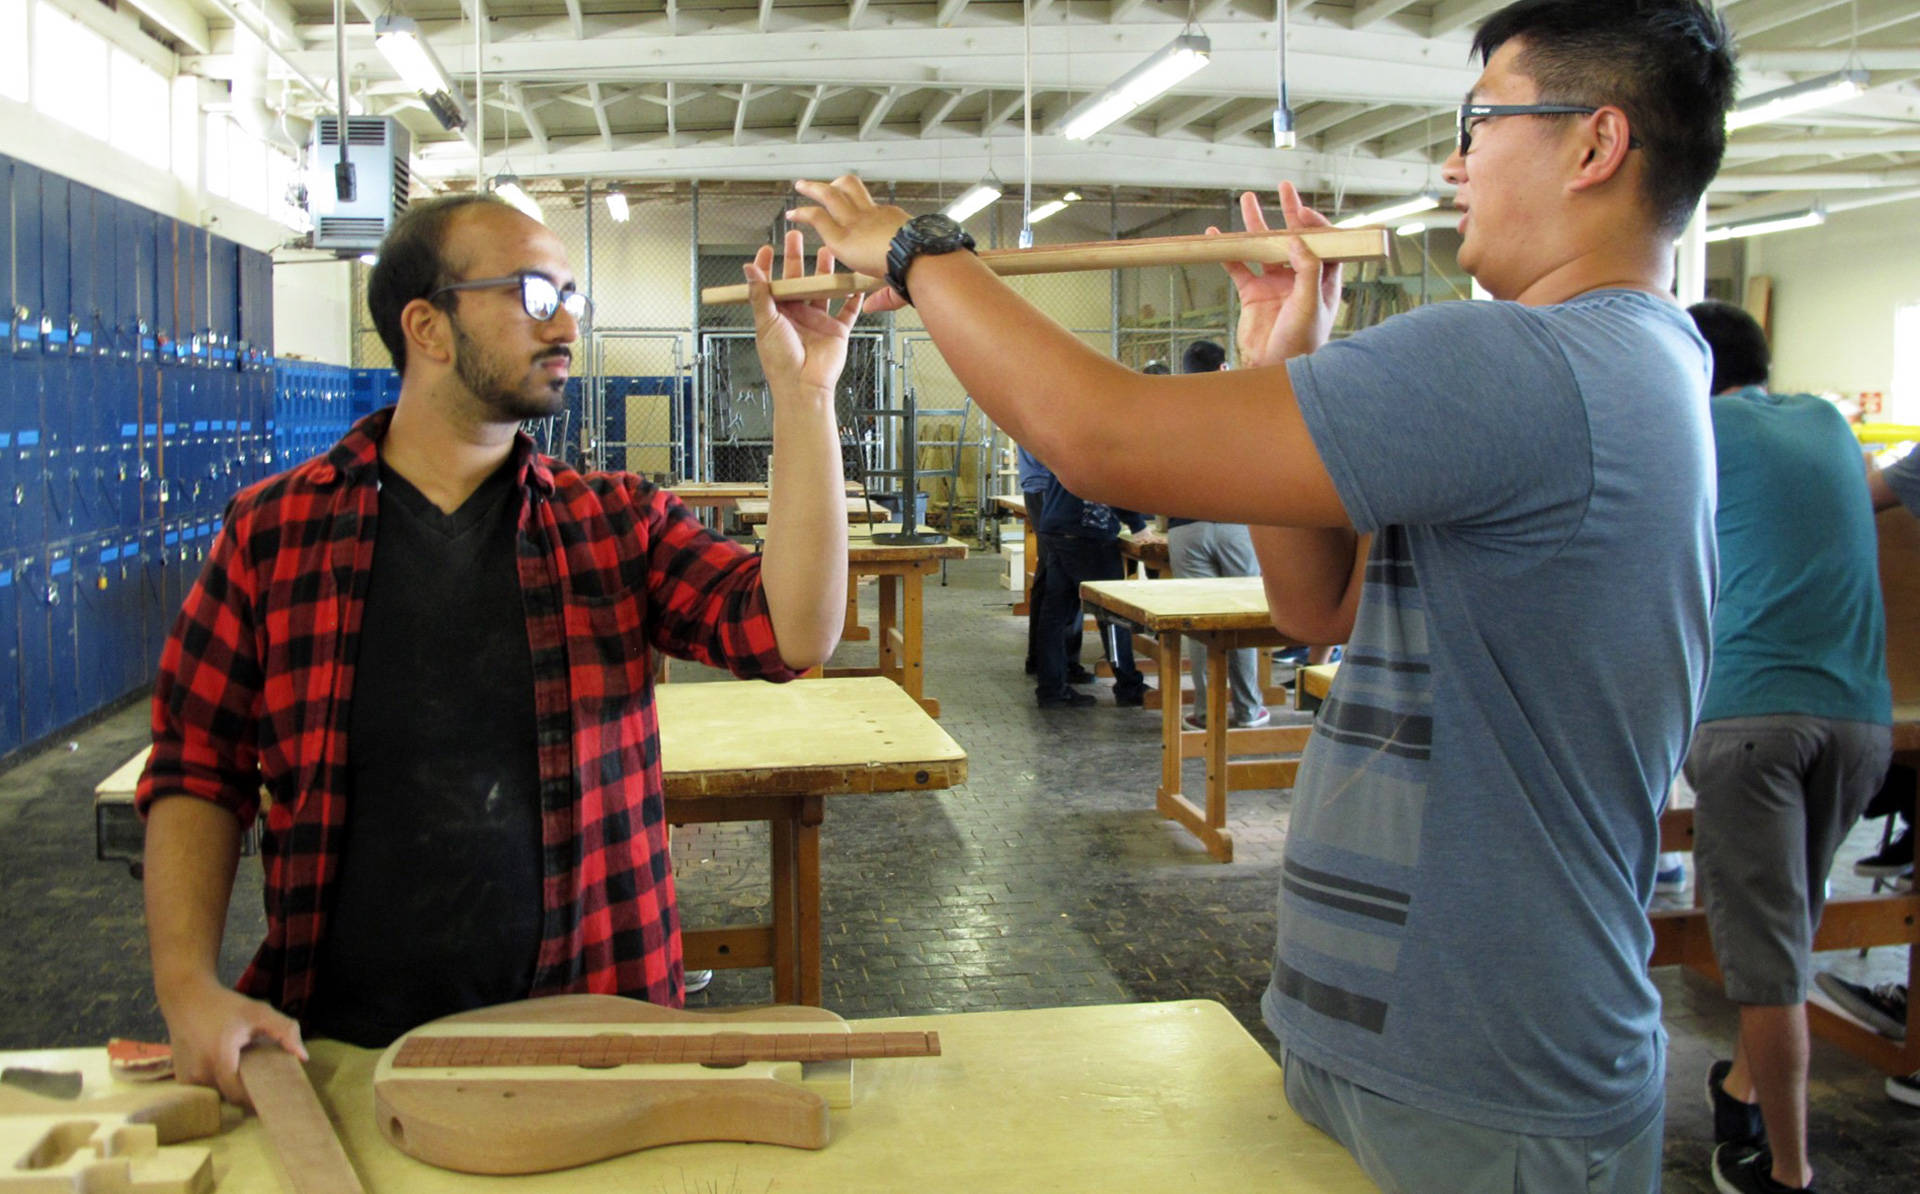 Senior Timothy Lee (R) checks out the curve on his fretboard with help from classmate Farhan Saleh. The two are taking wood shop and physics at Camarillo High School as part of the STEM Guitar Project. Susan Valot/KCRW